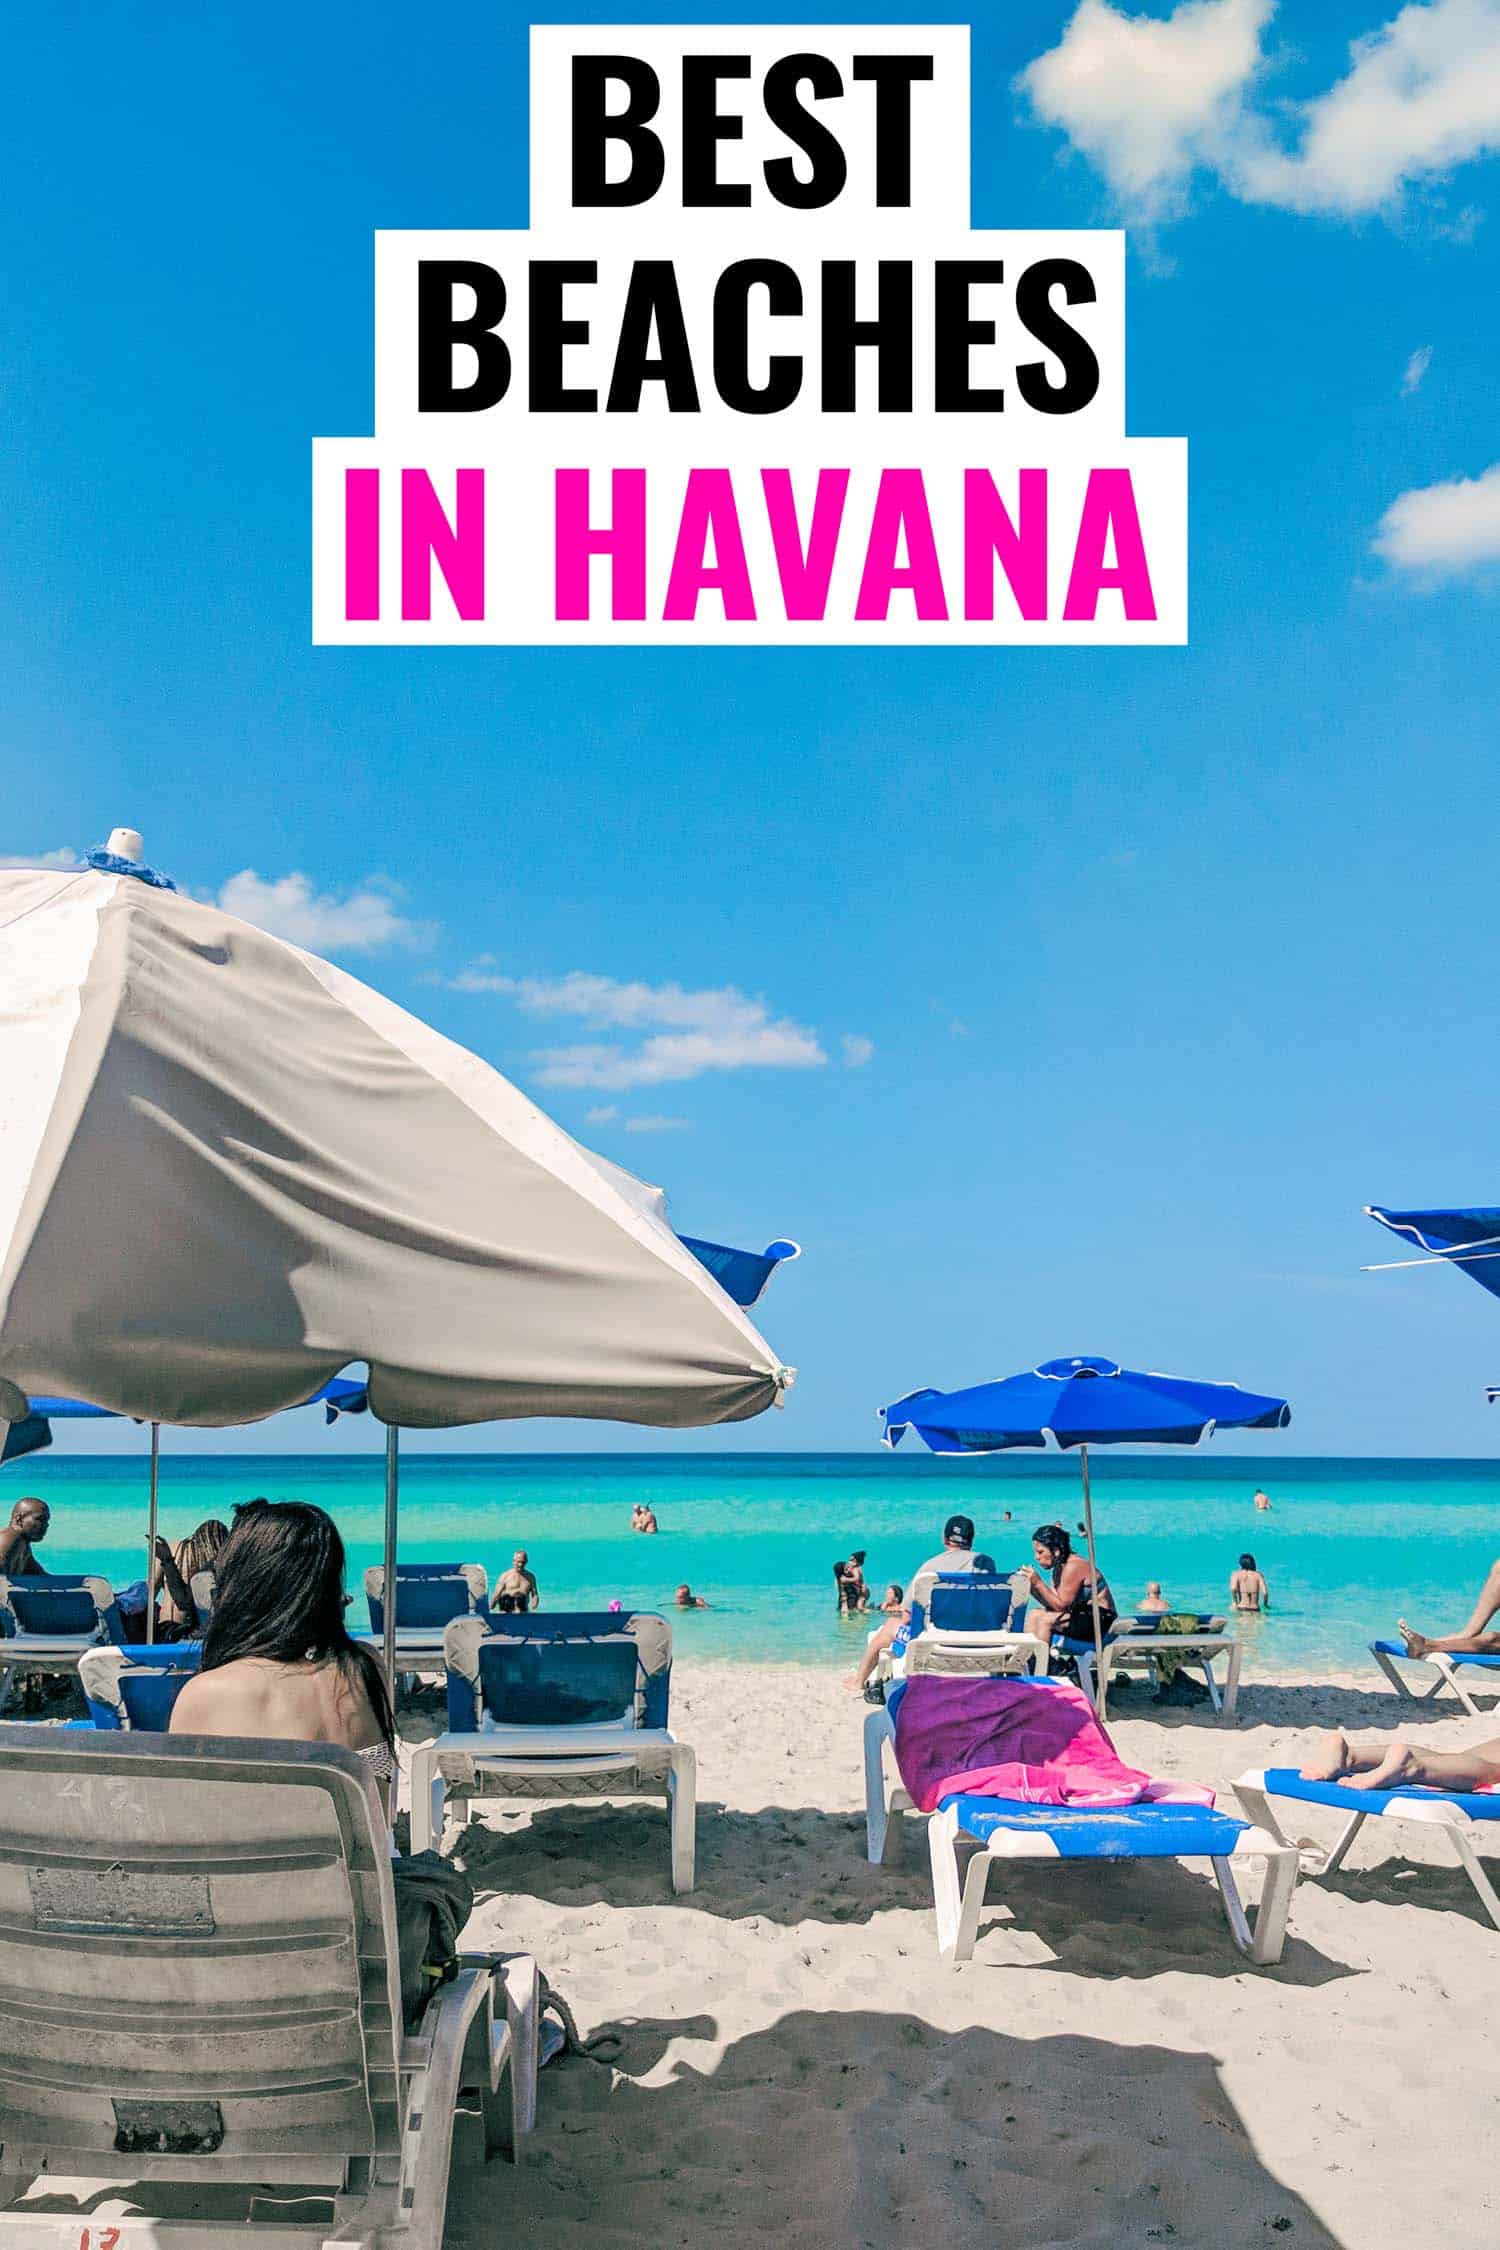 Havana beaches are some of the best beaches in Cuba. Here are the top ones to visit #beach #cuba